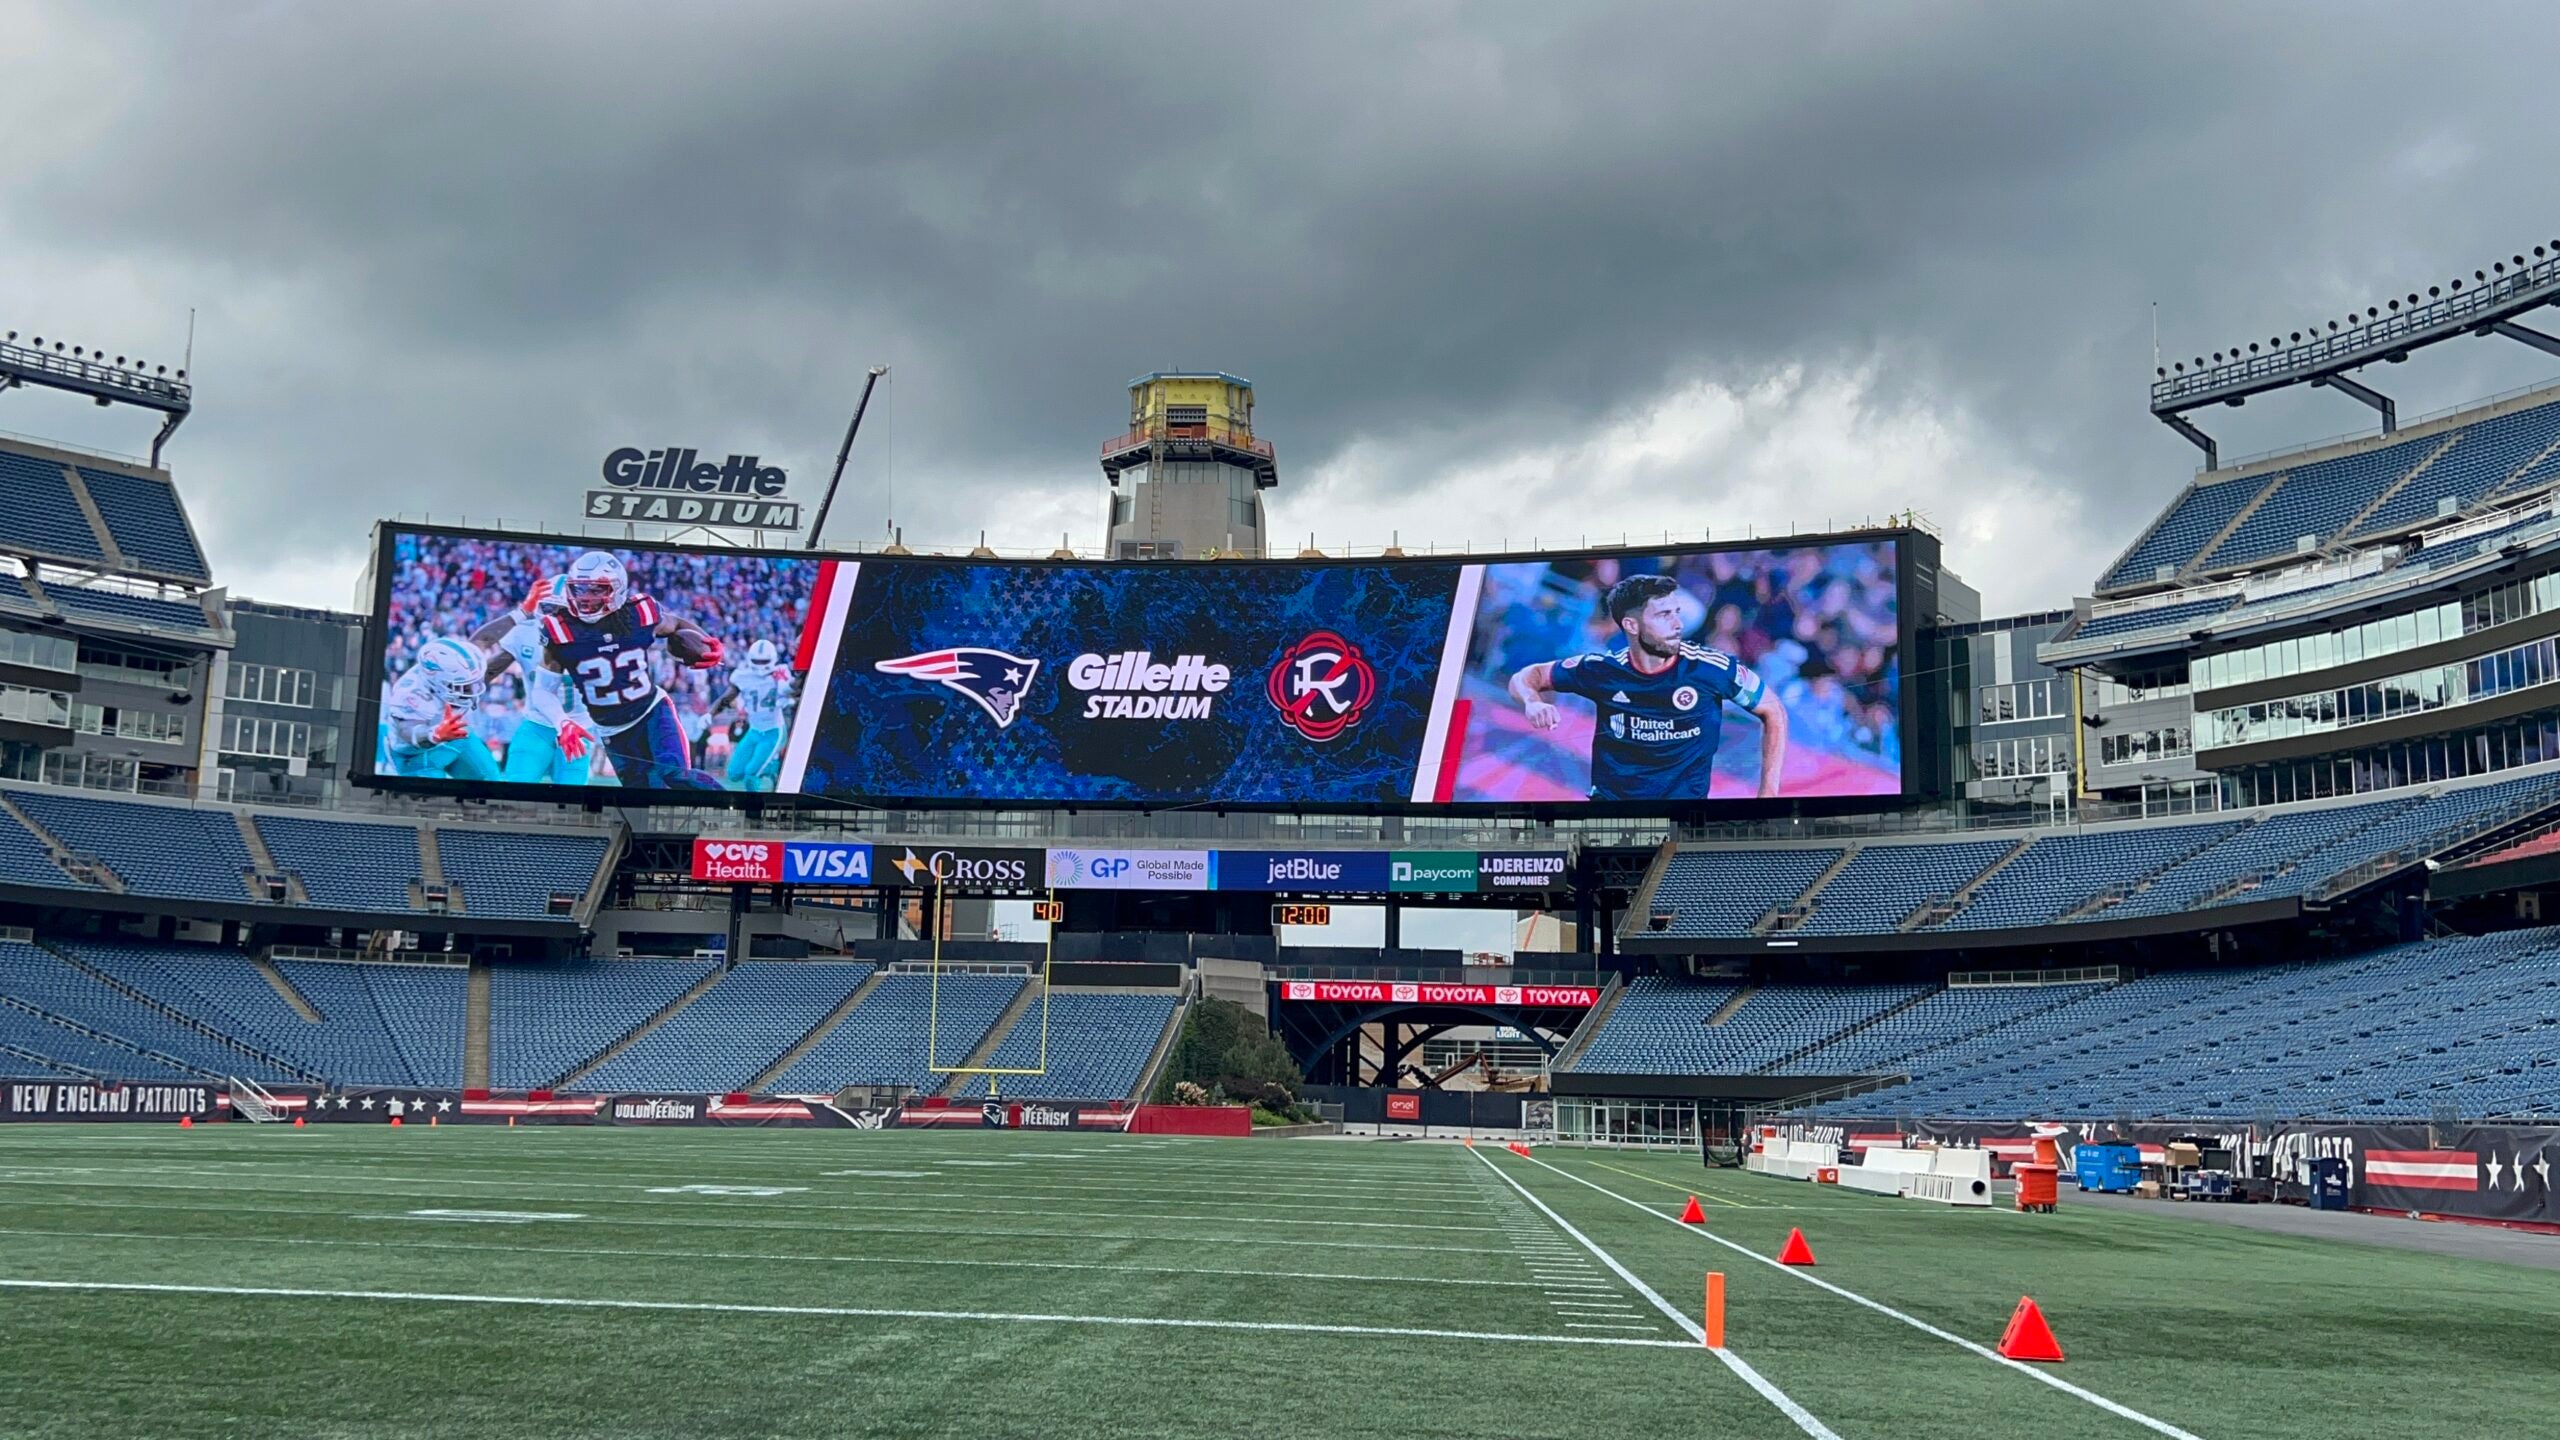 The new Gillette Stadium video board is five times larger than the previous board.